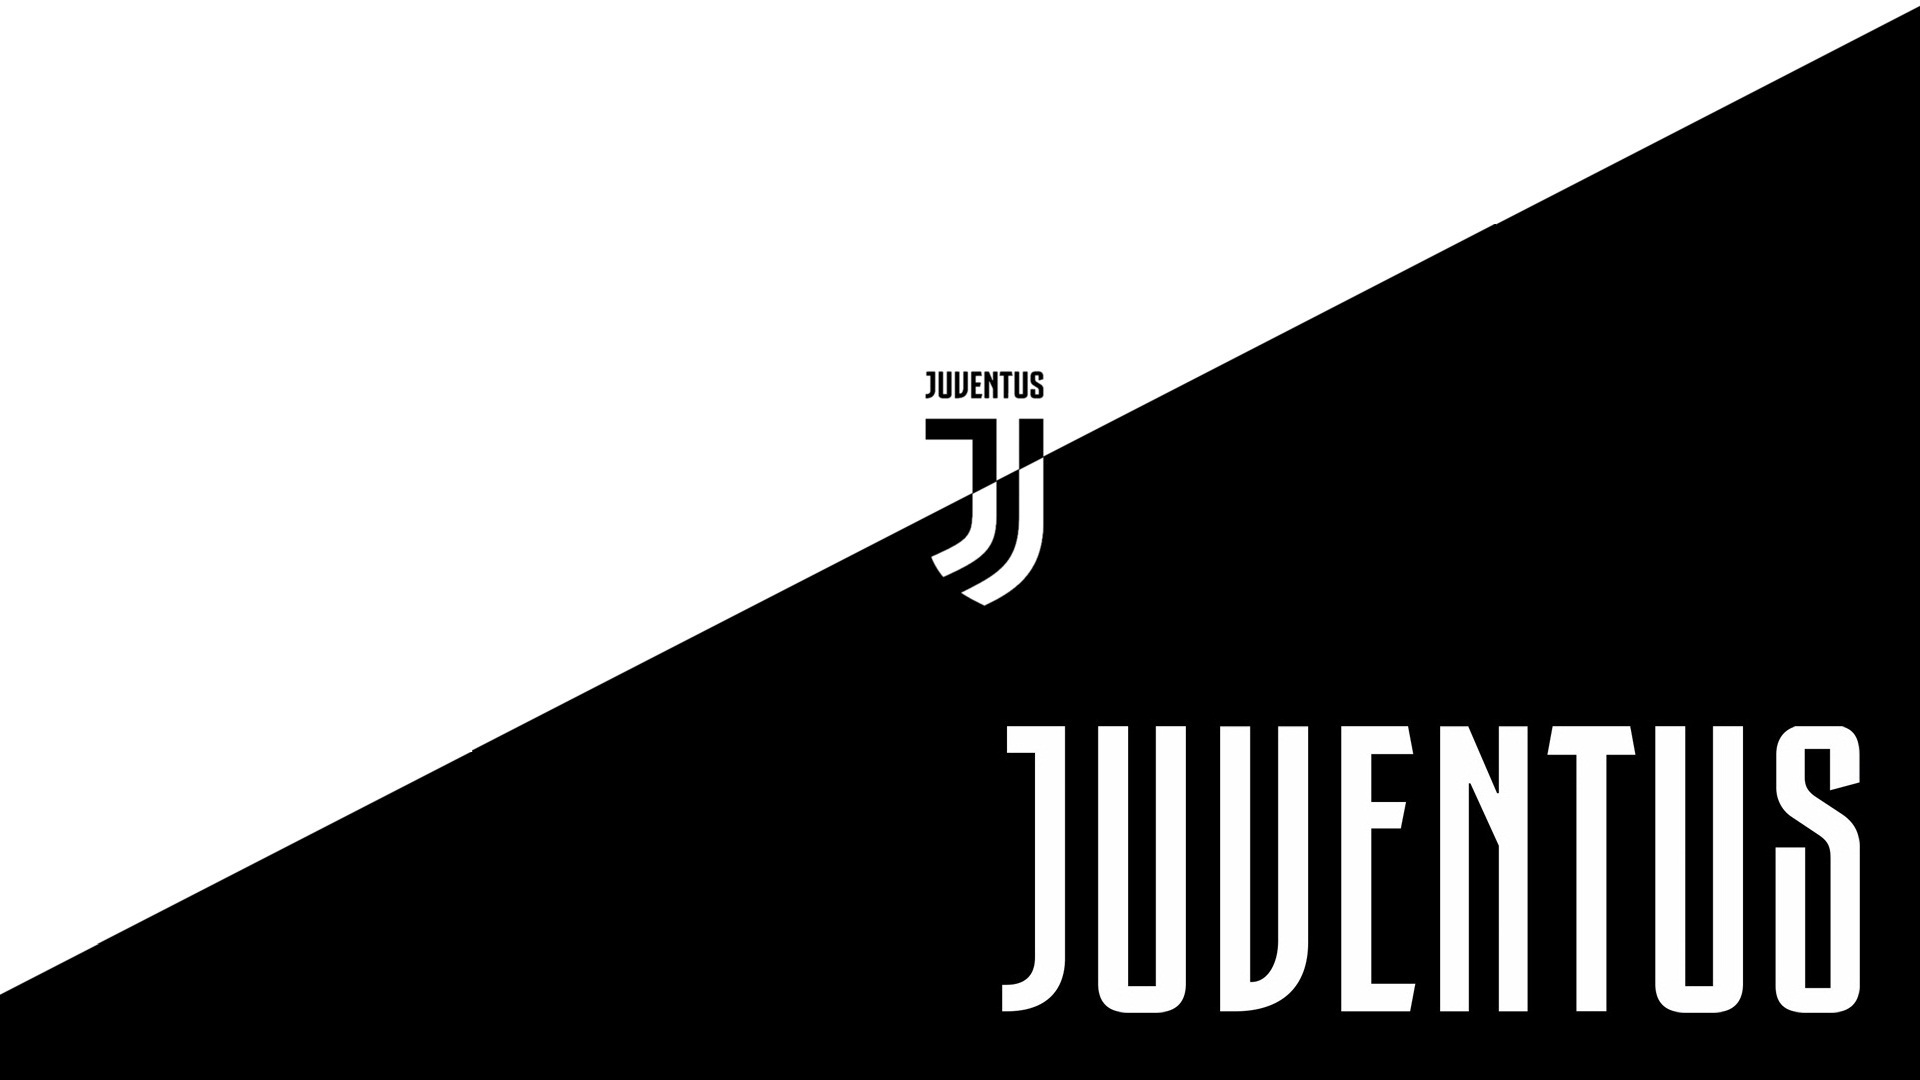 Juventus Wallpaper HD With Resolution 1920X1080 pixel. You can make this wallpaper for your Mac or Windows Desktop Background, iPhone, Android or Tablet and another Smartphone device for free